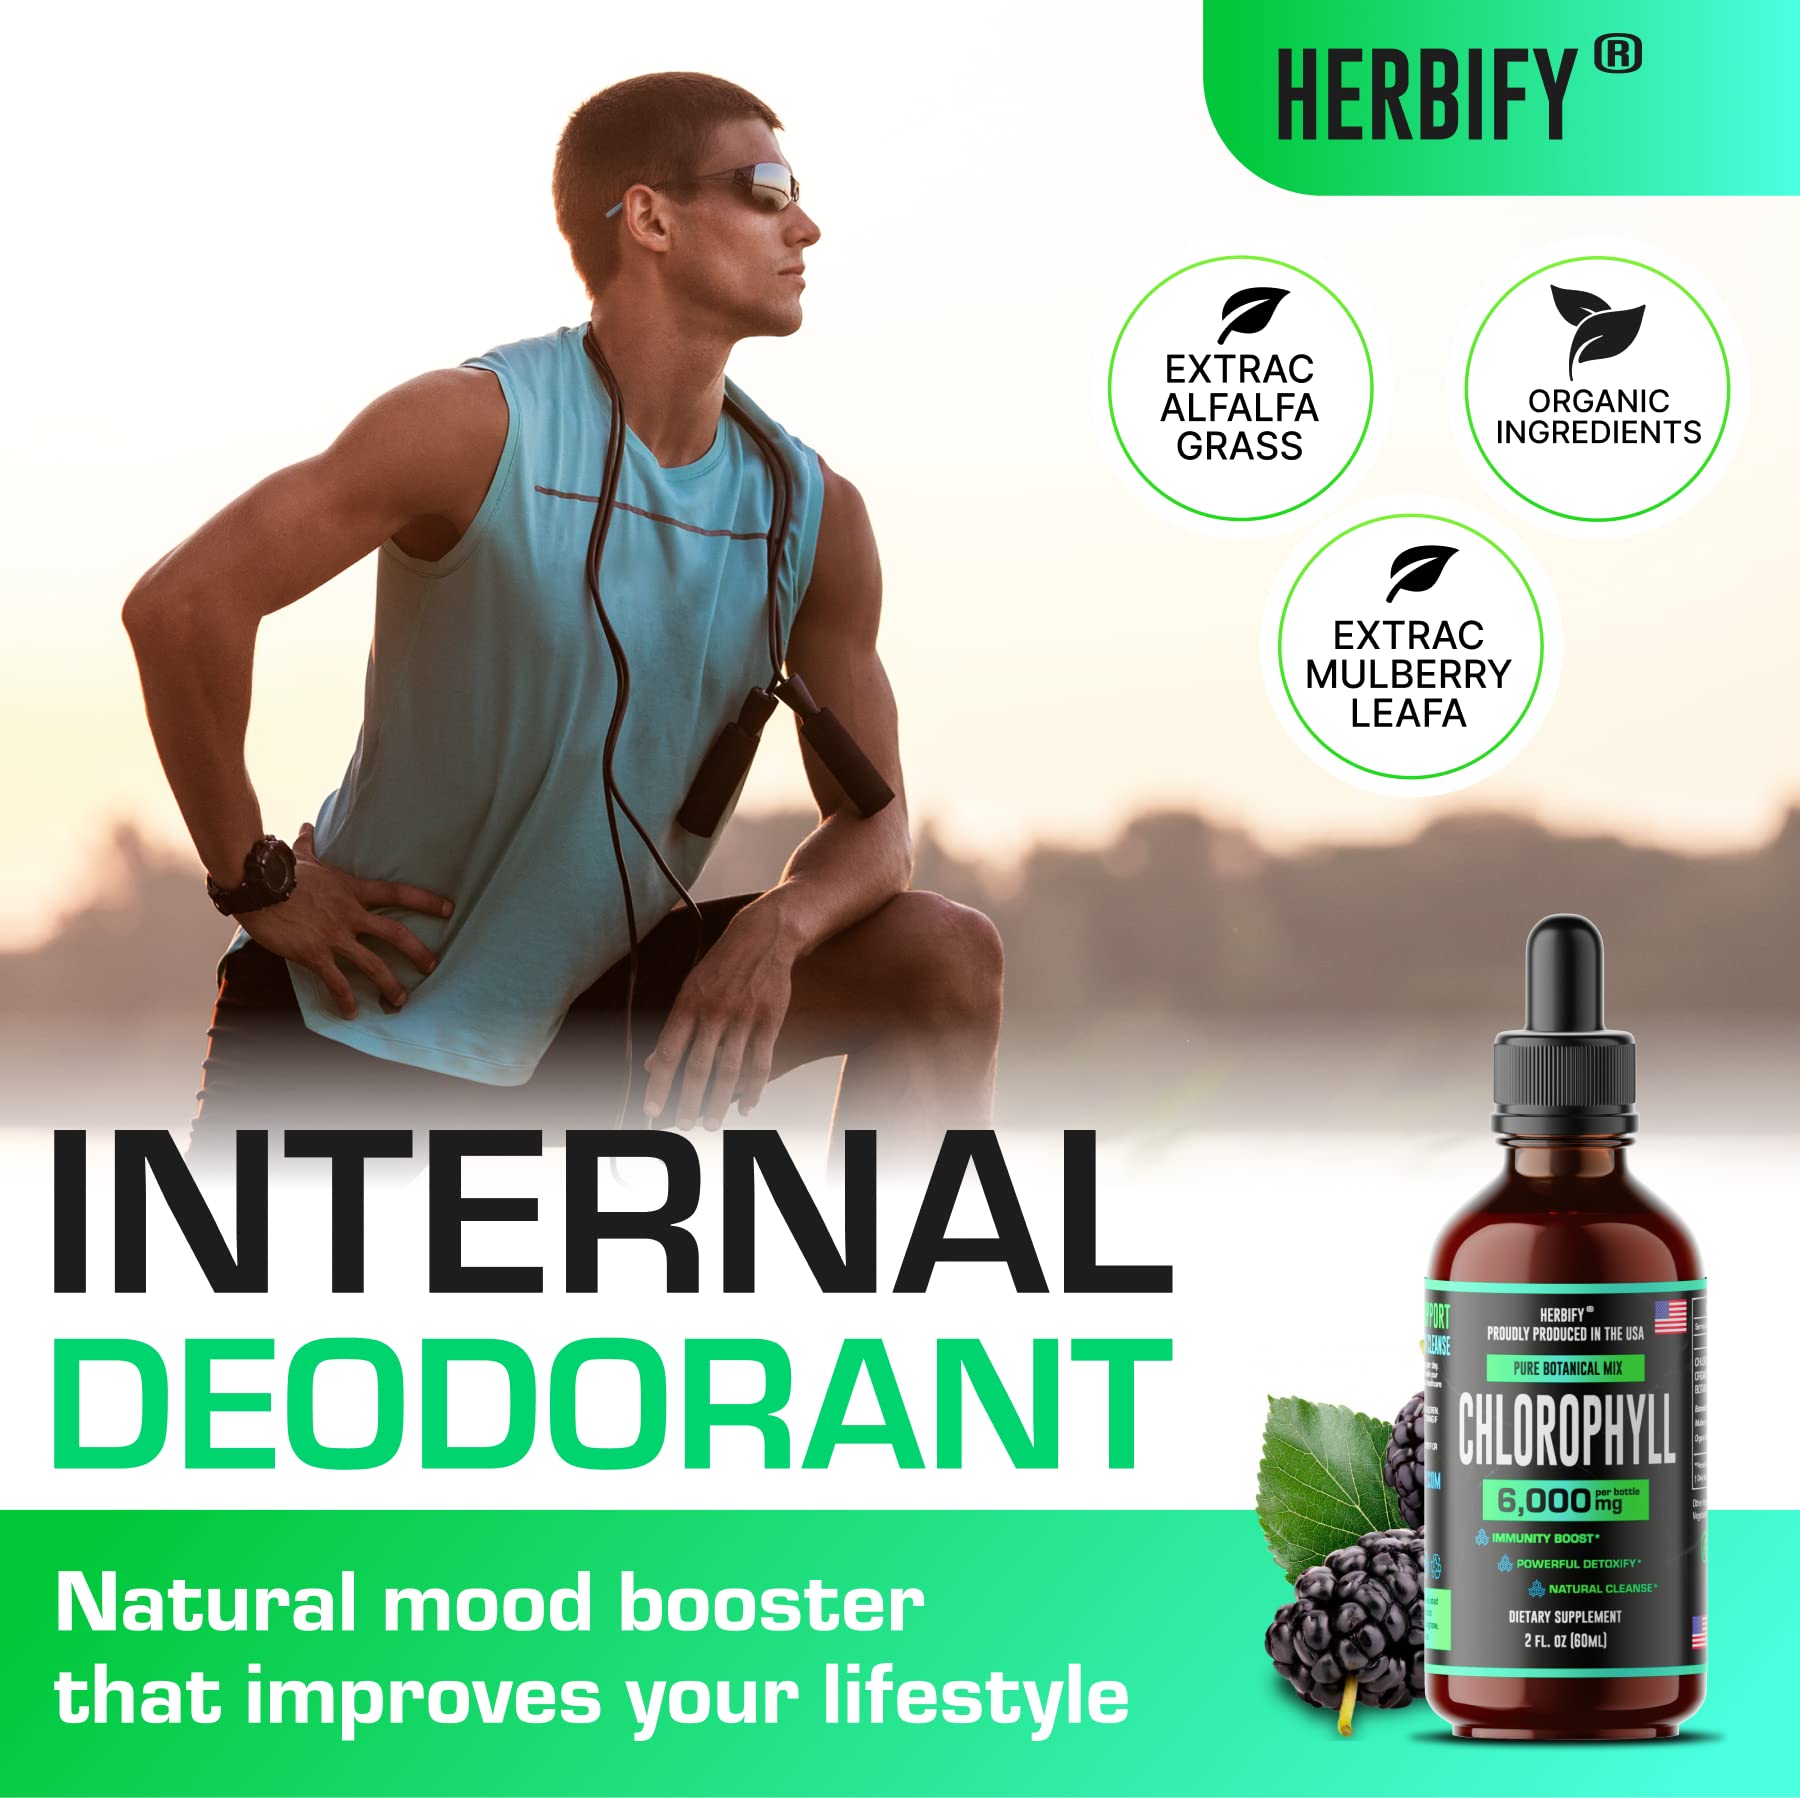 HERBIFY Bundle - Mullein Leaf Extract & Chlorophyll Extract - Respiratory Support & Body Detox